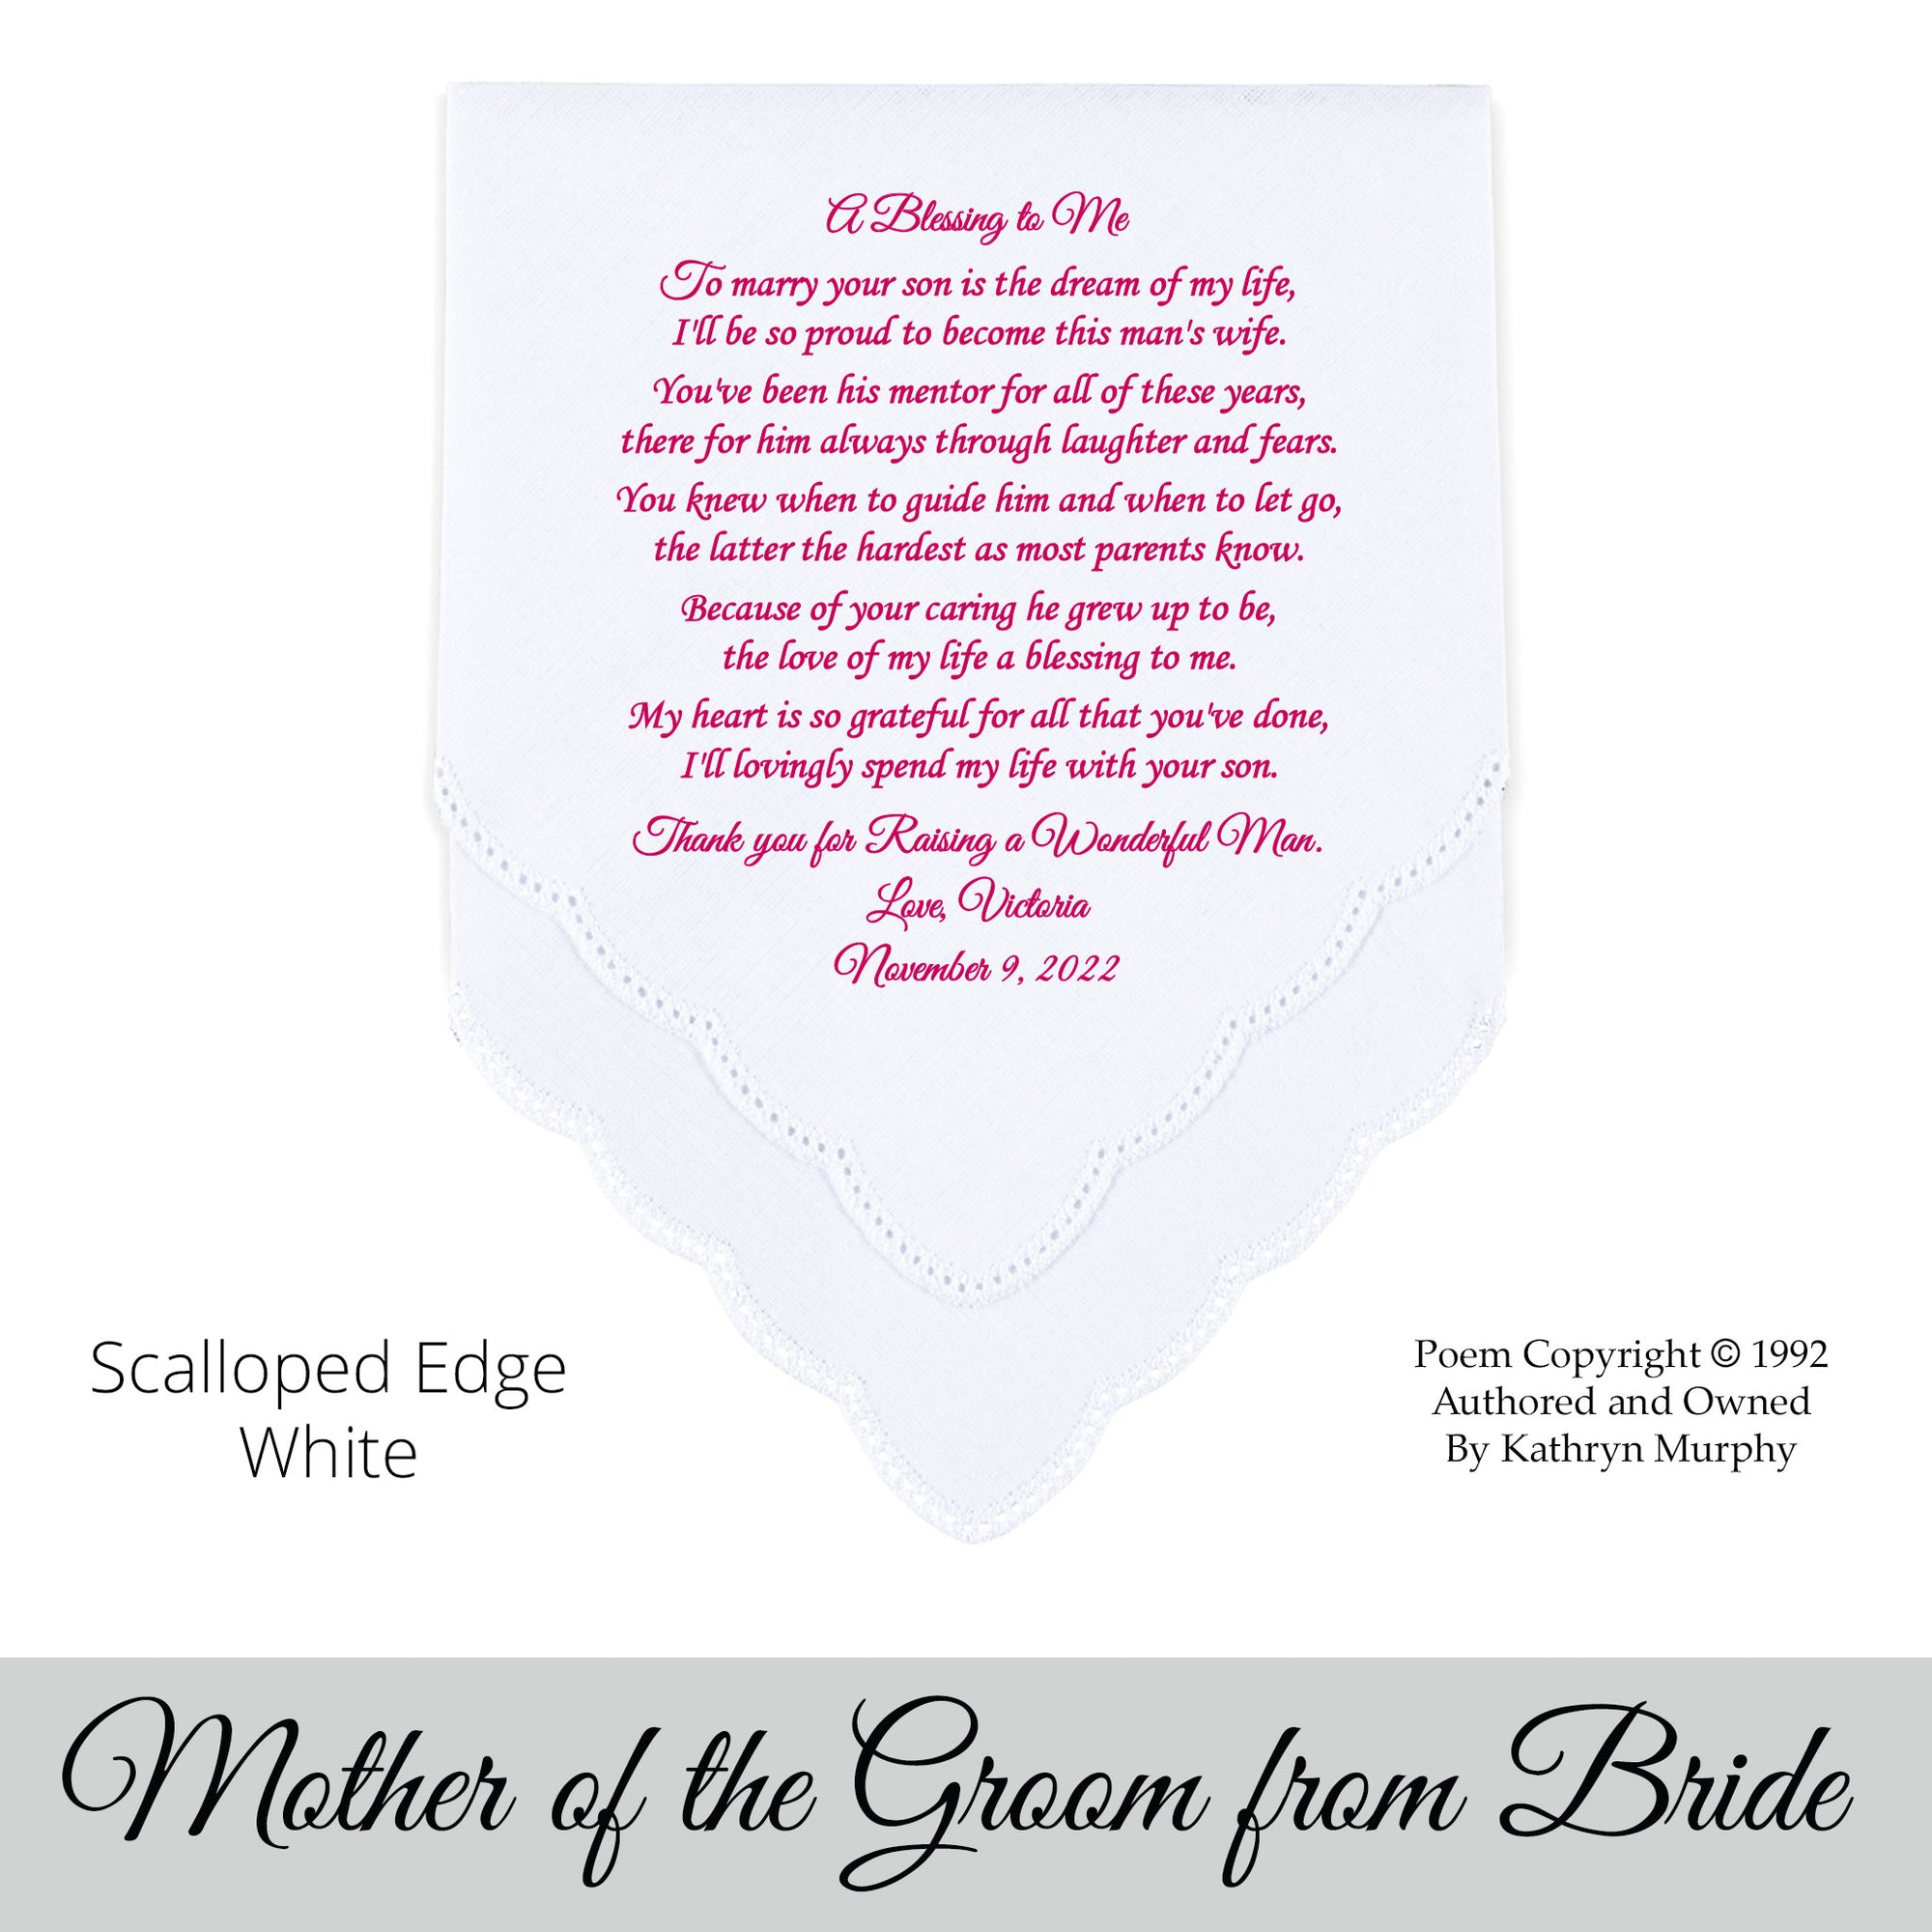 gift for the mother of the groom Wedding Hankie with printed poem from the bride 